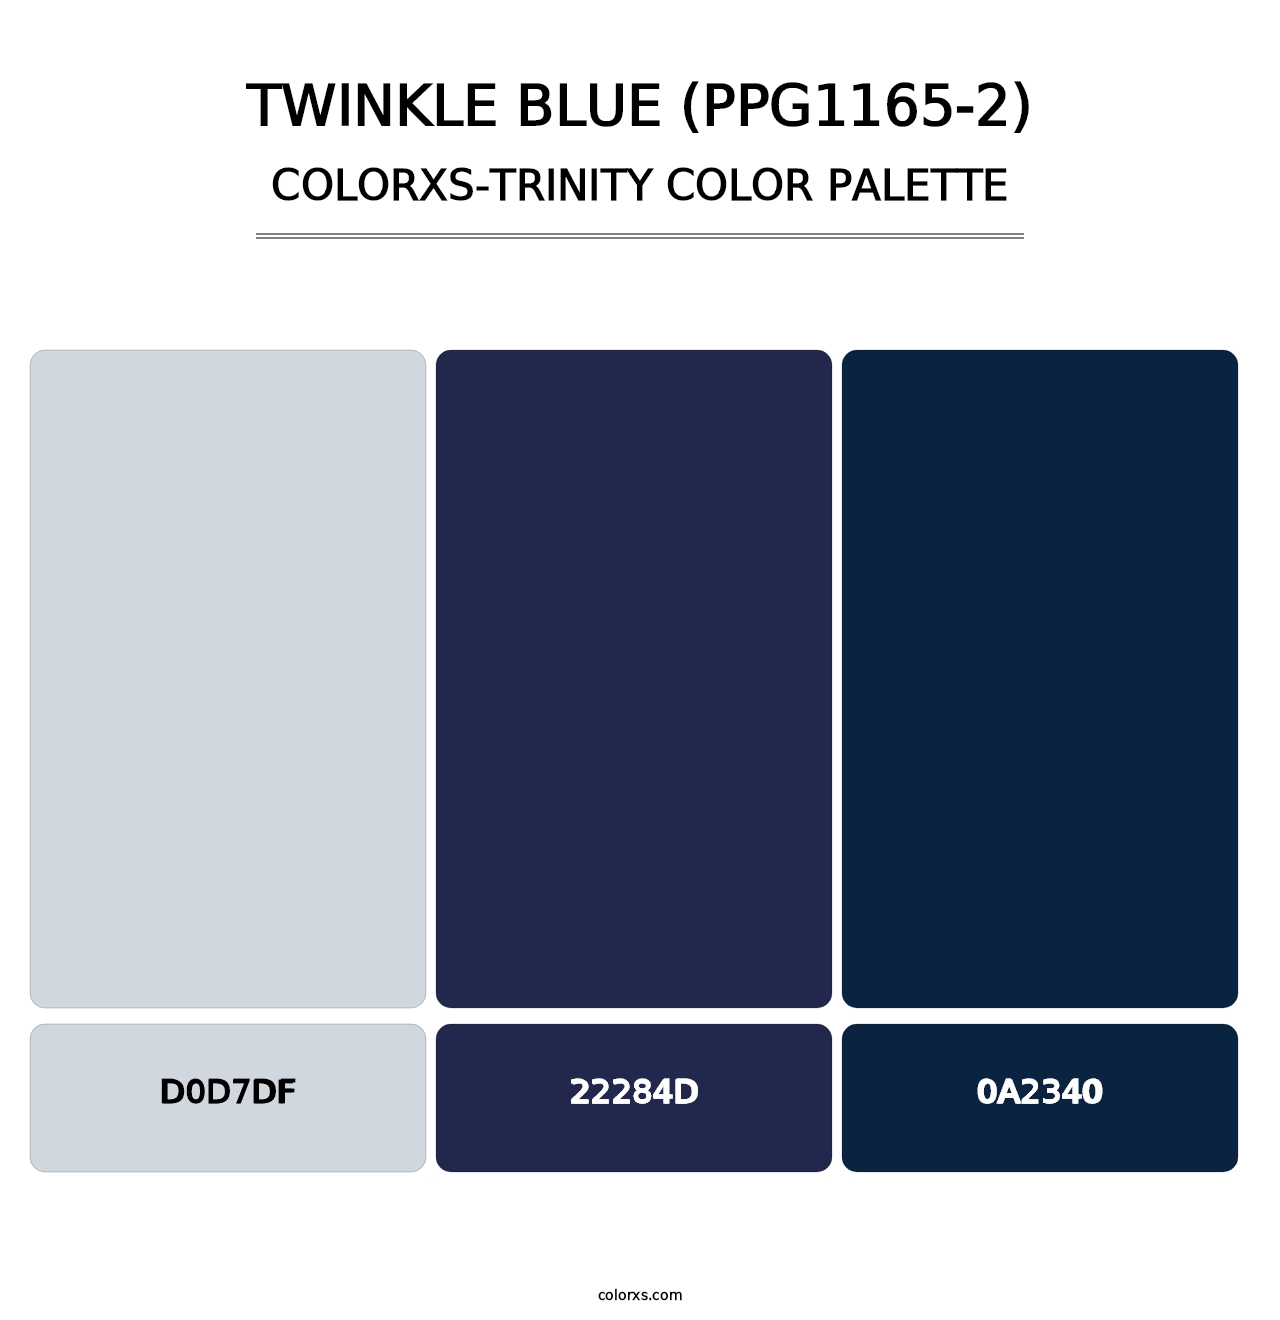 Twinkle Blue (PPG1165-2) - Colorxs Trinity Palette